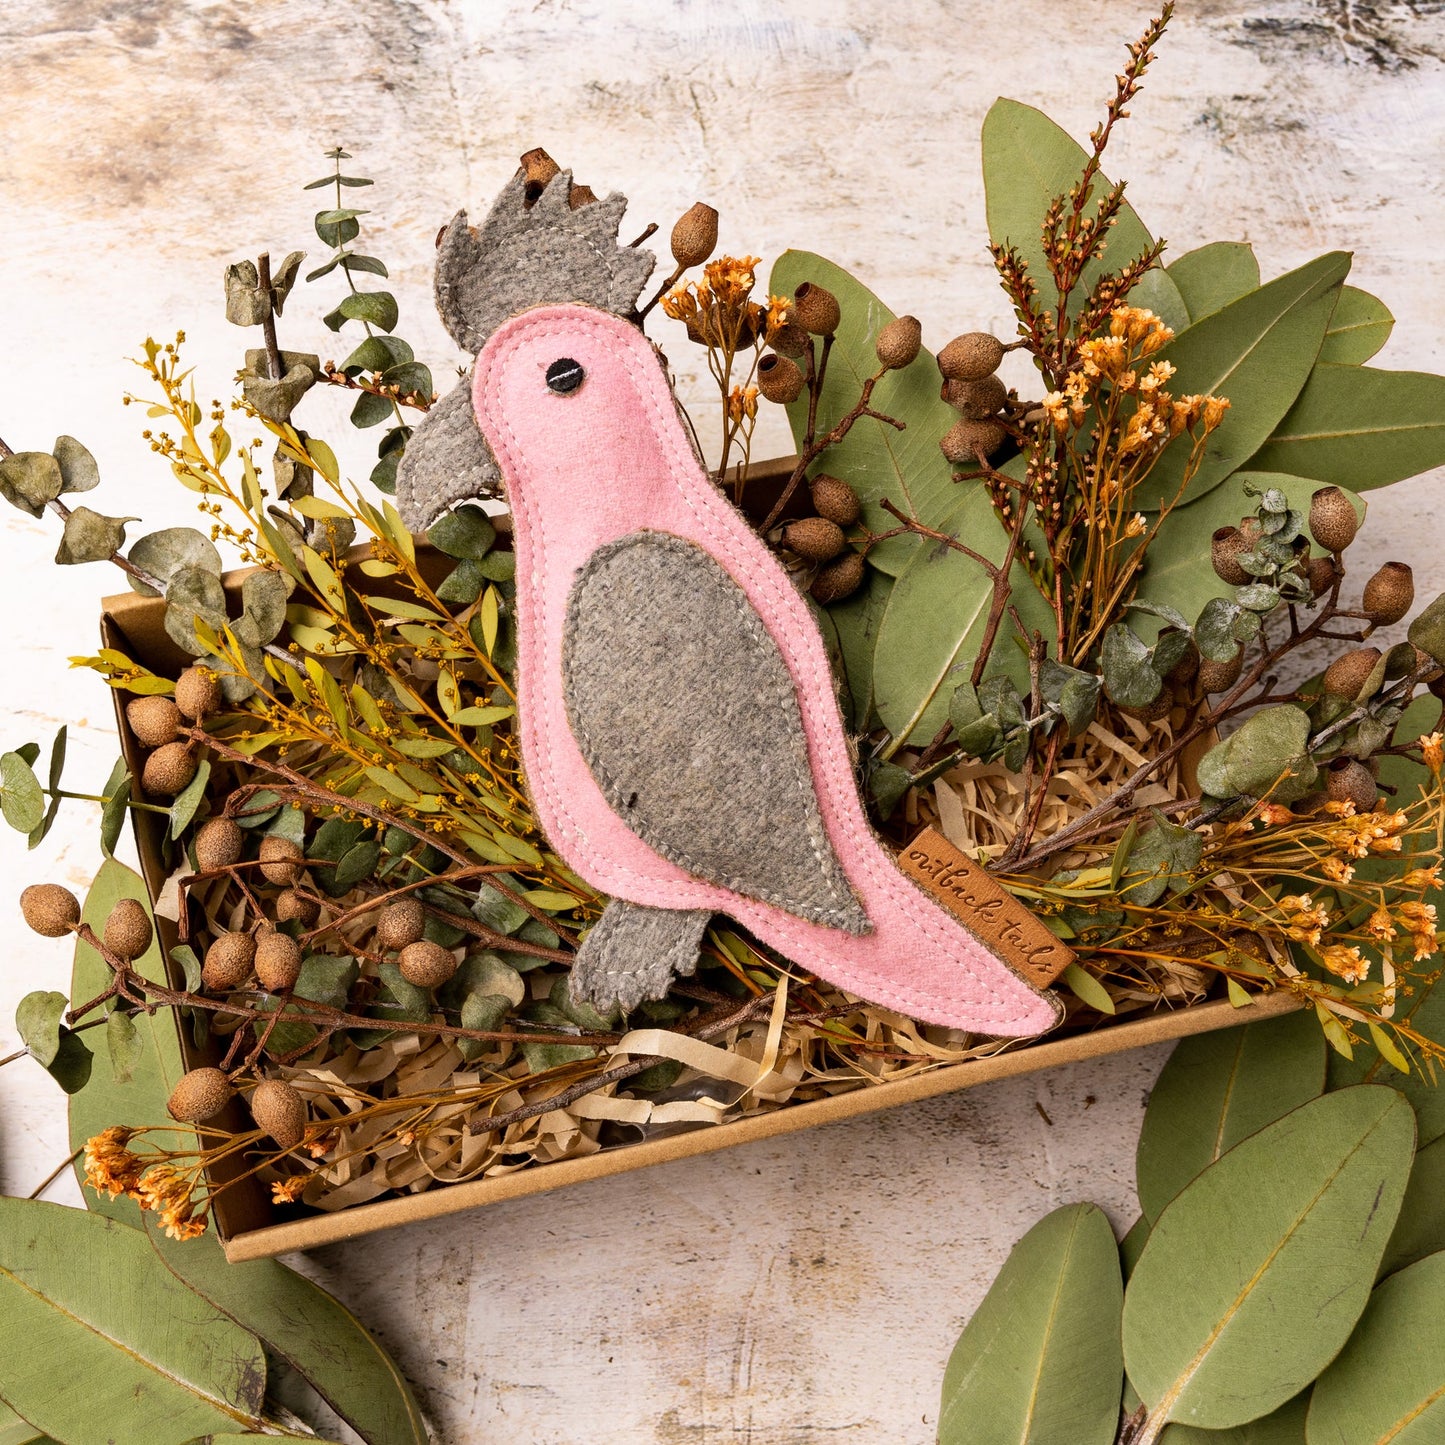 Eco friendly dog toy Gertie Galah by outback tails laying on a bed of Australian native plants